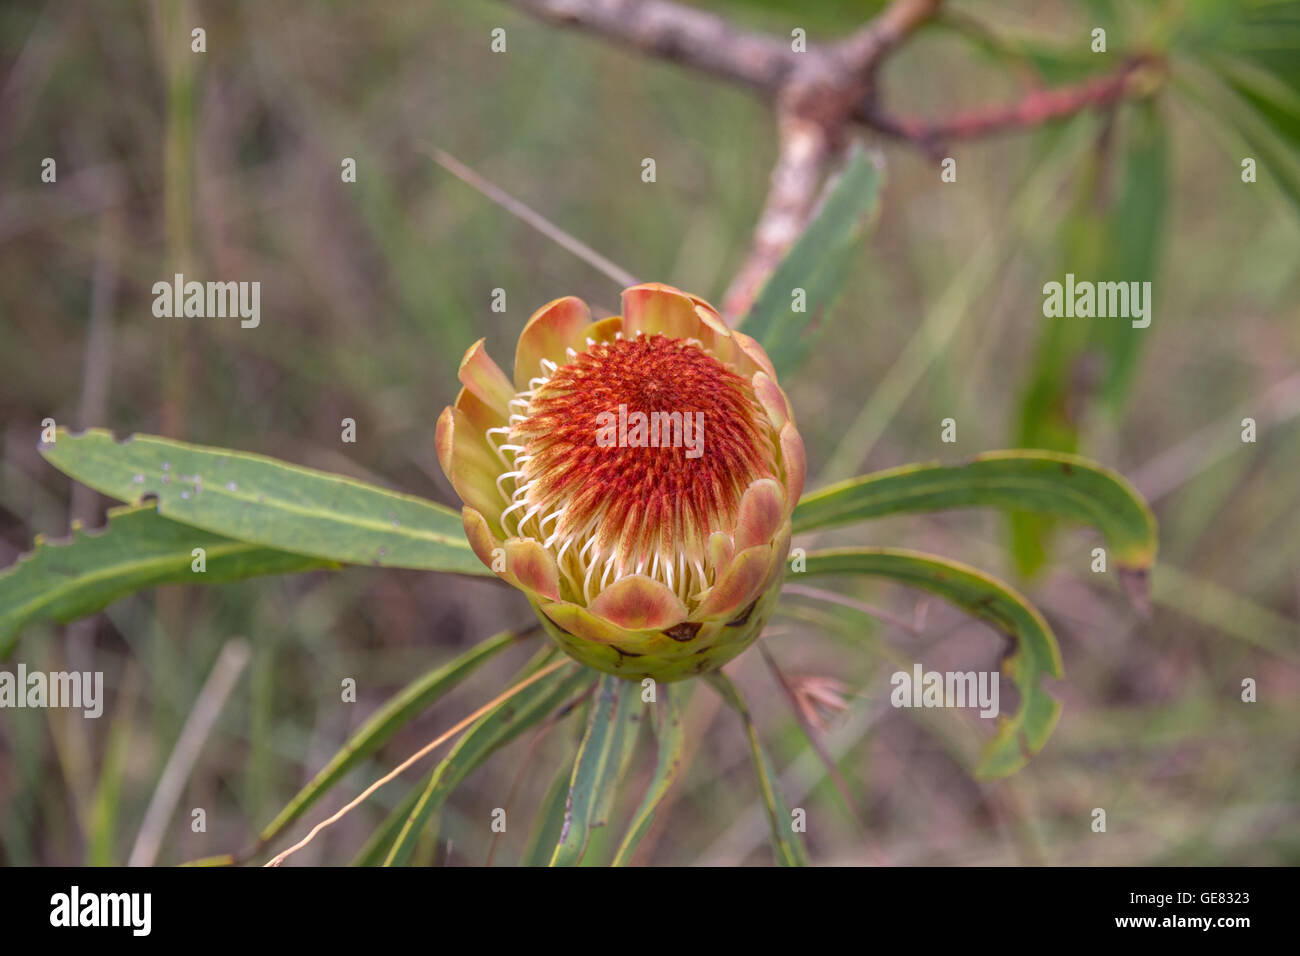 Looking down into red and white core of Protea flower with leaves spreading across the image. Stock Photo